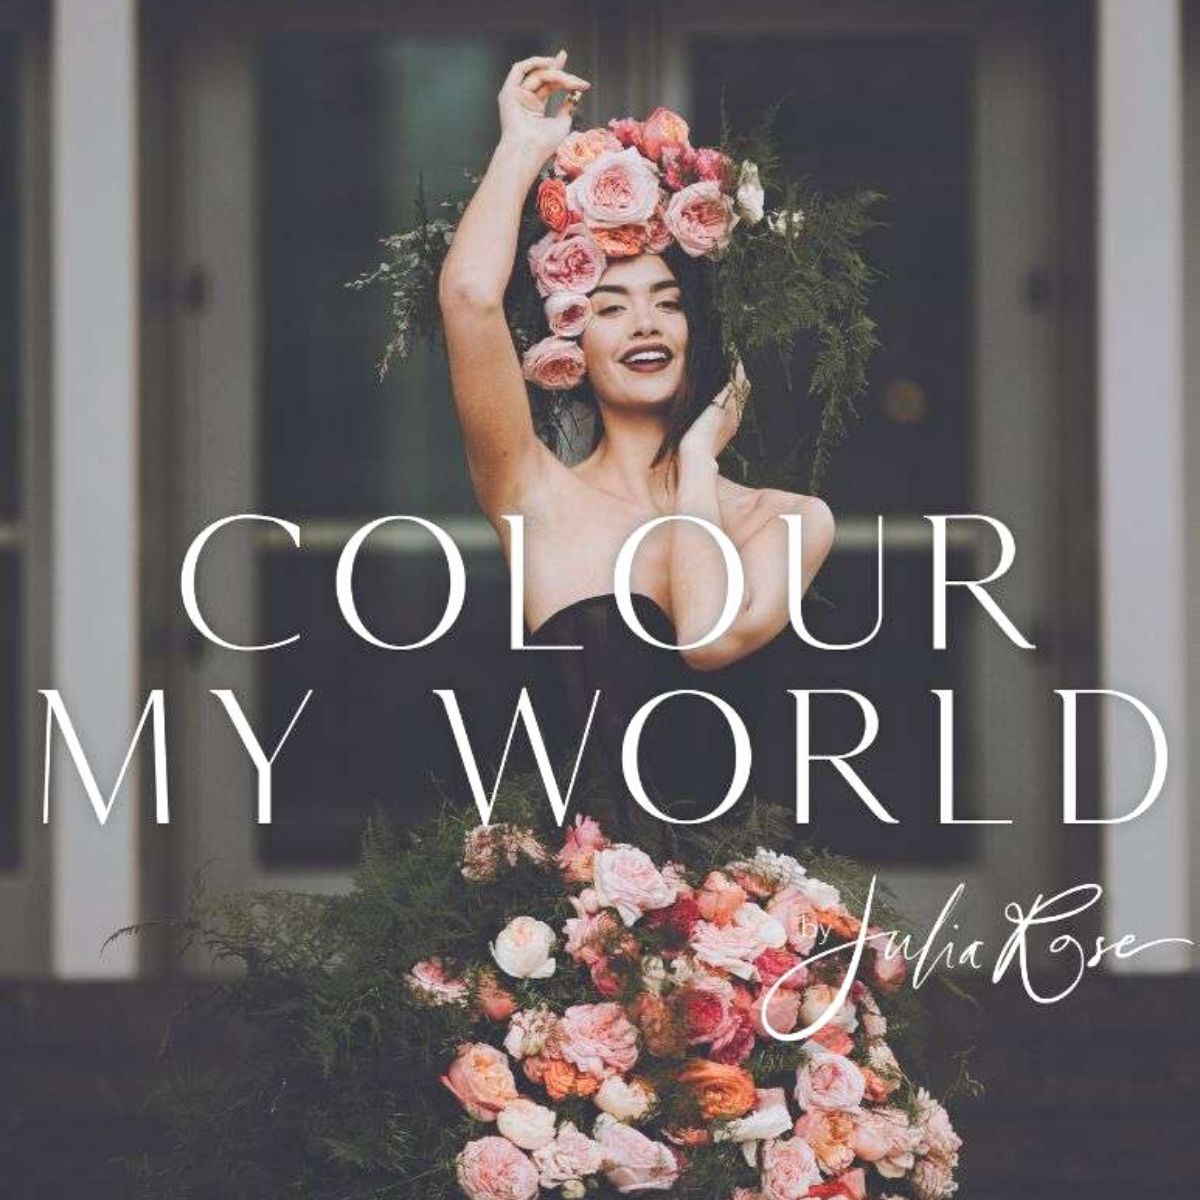 Color my world book by Julia Rose